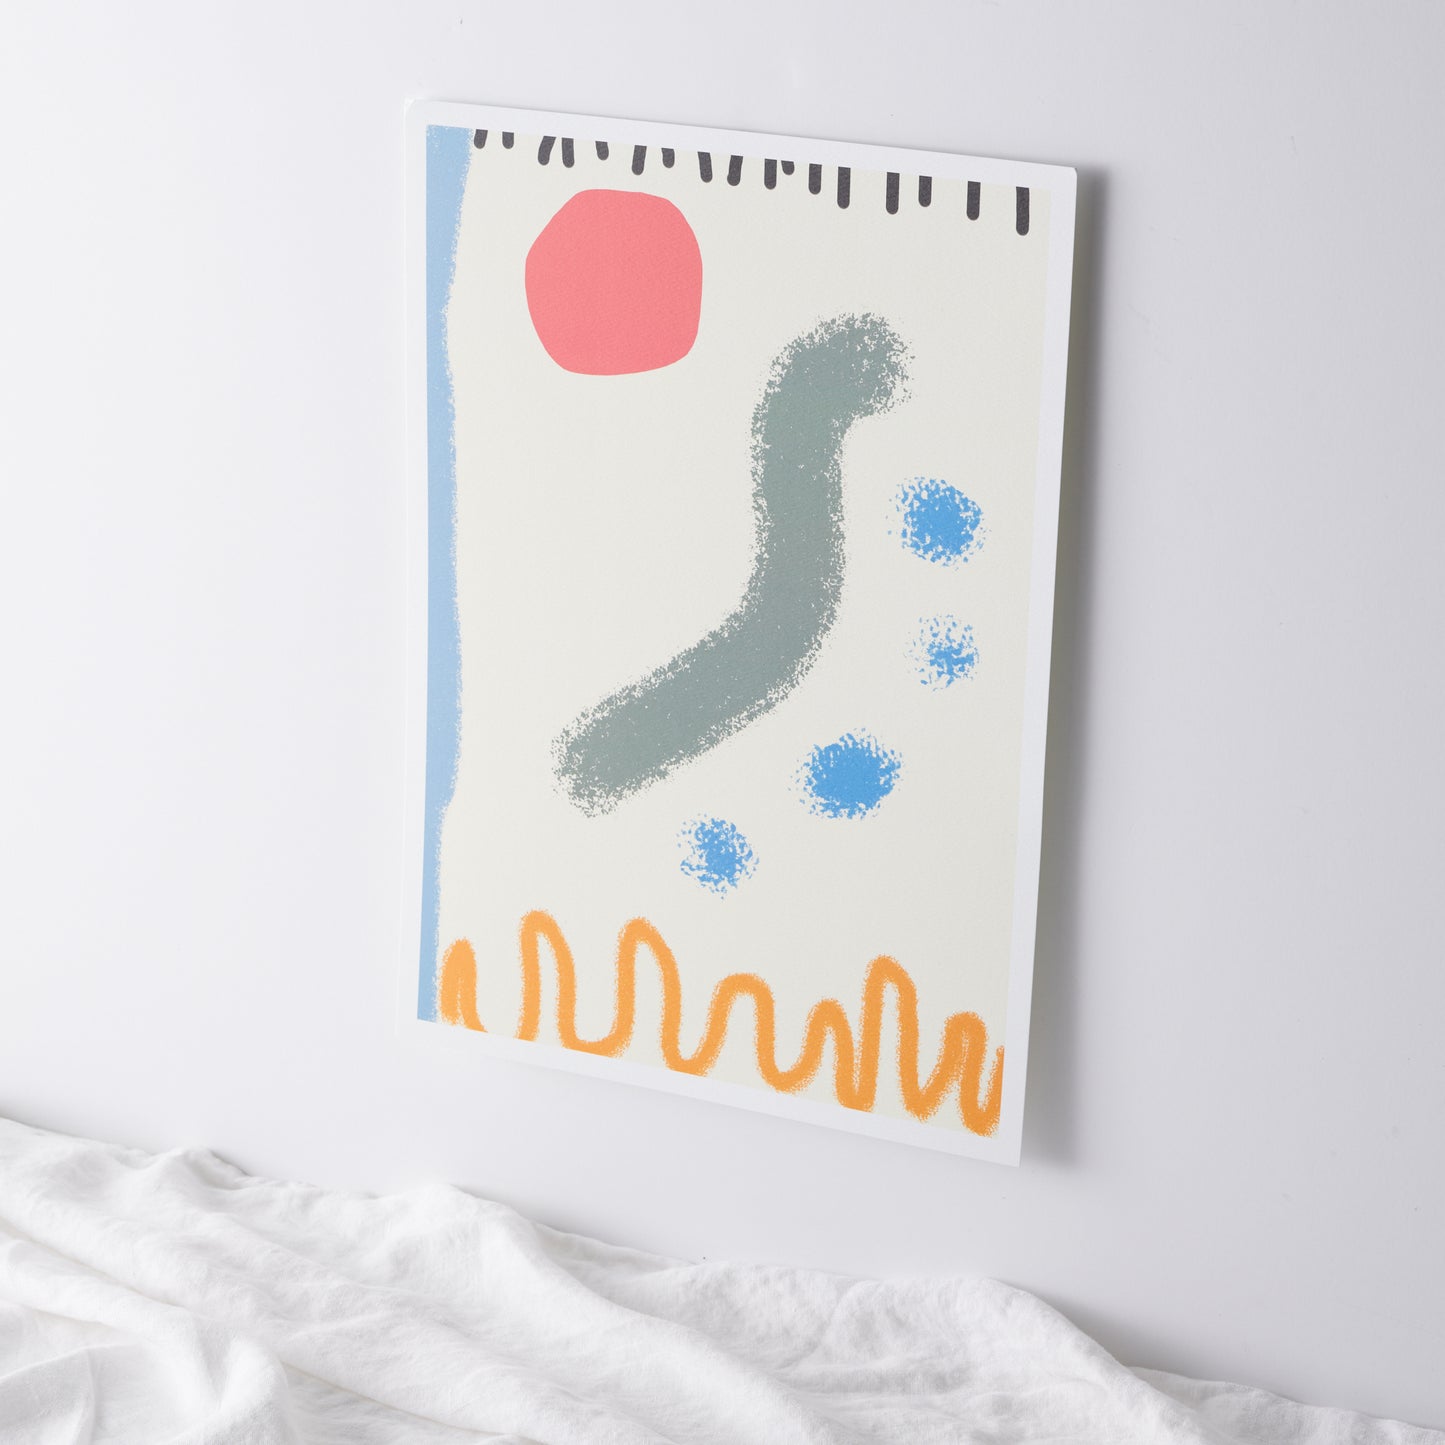 Unique art print with contemporary squiggles and lines.